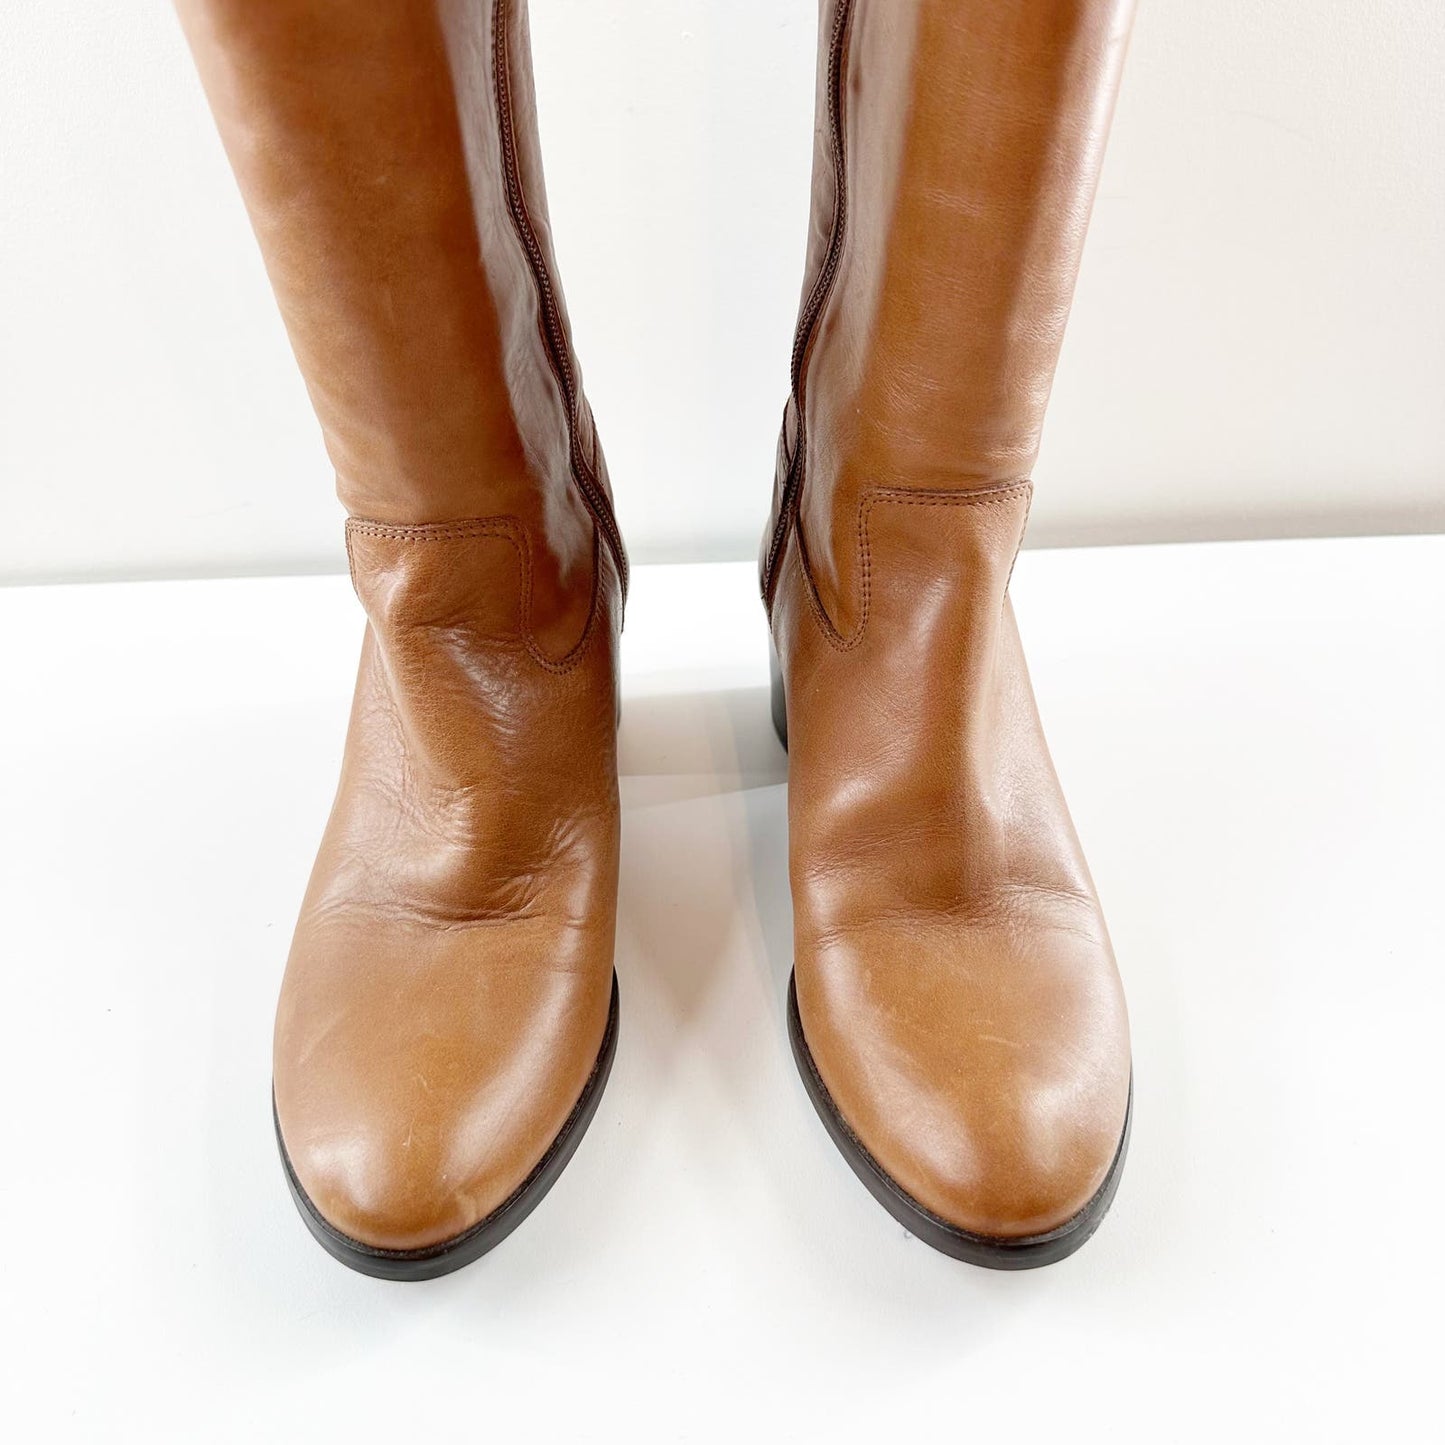 Charles David Braden Knee High Leather Western Riding Boots Cognac Brown 8